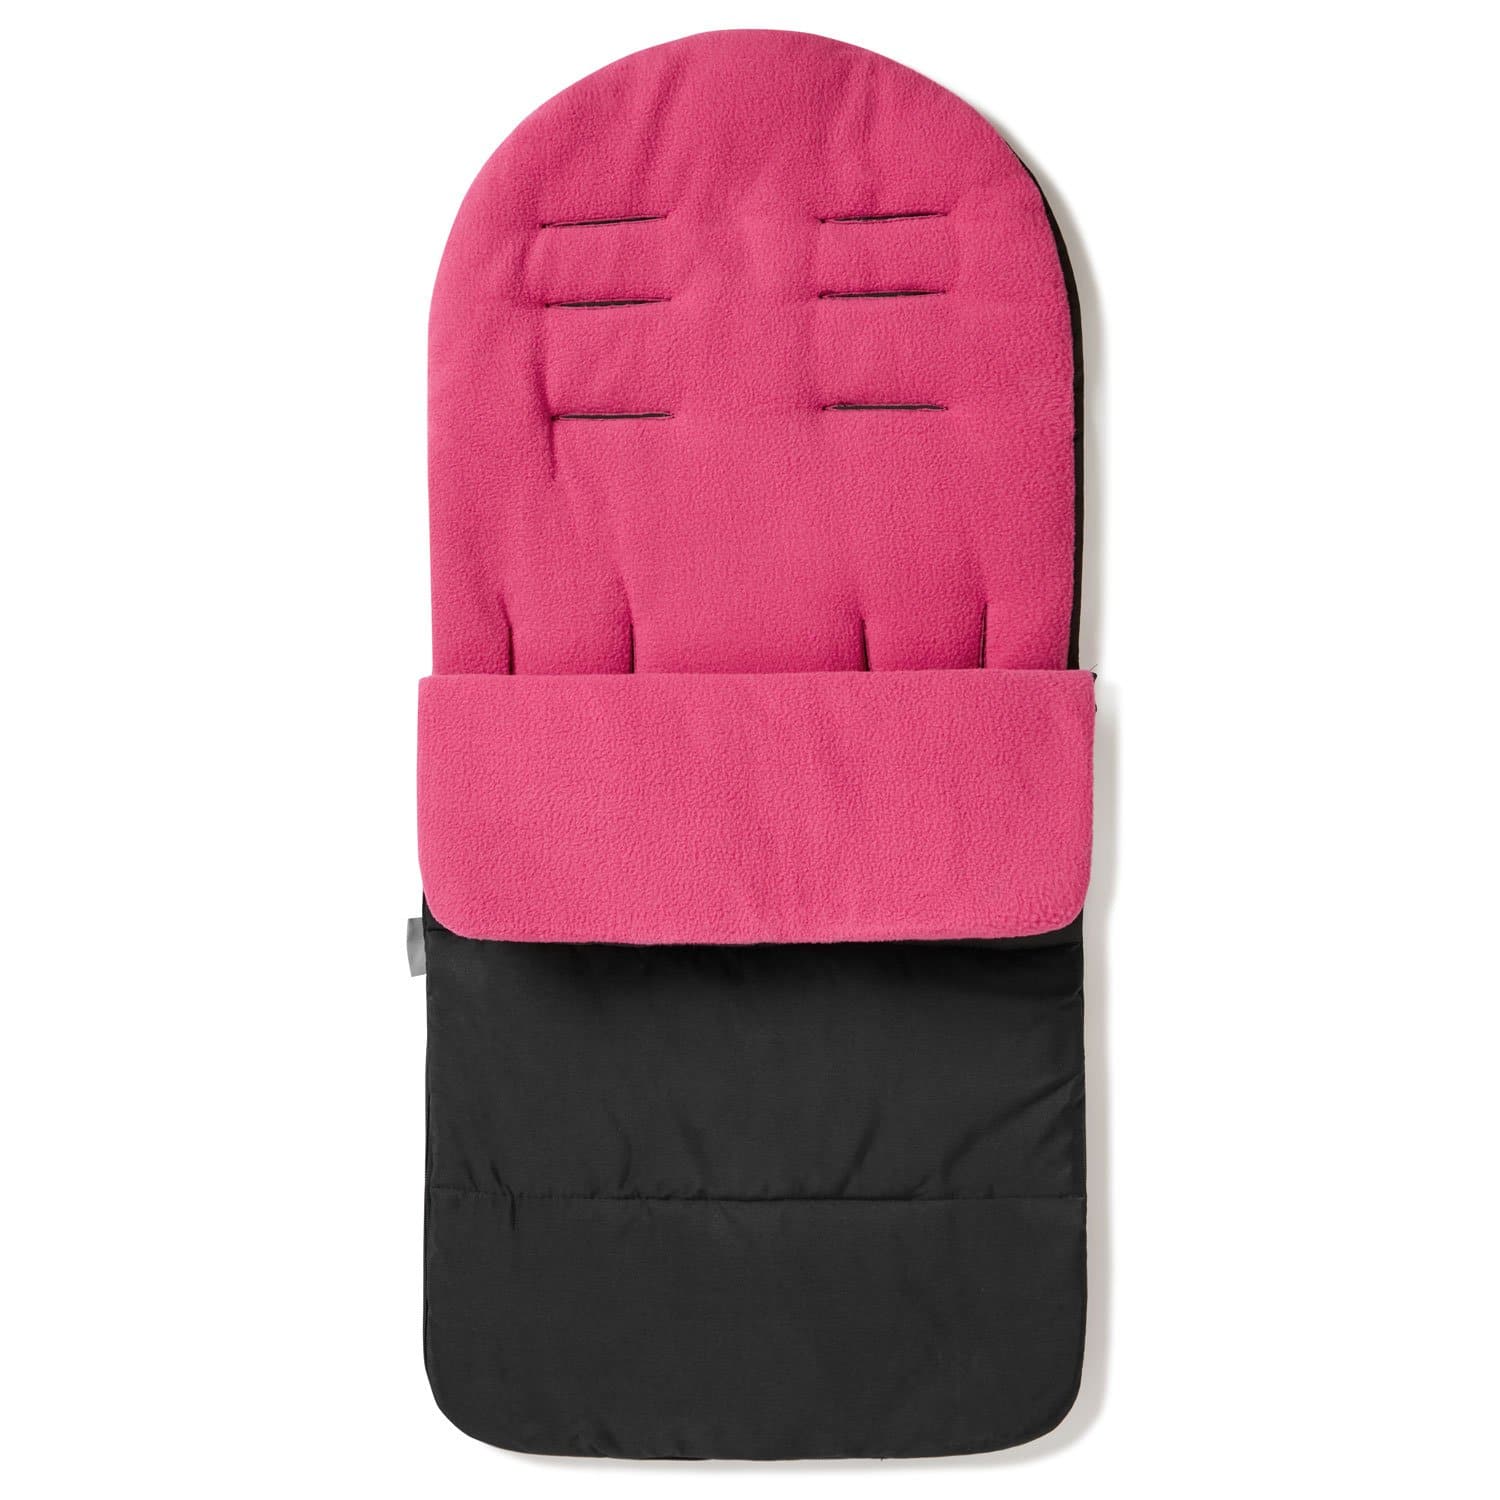 Premium Footmuff / Cosy Toes Compatible with Hesba - Pink Rose / Fits All Models | For Your Little One